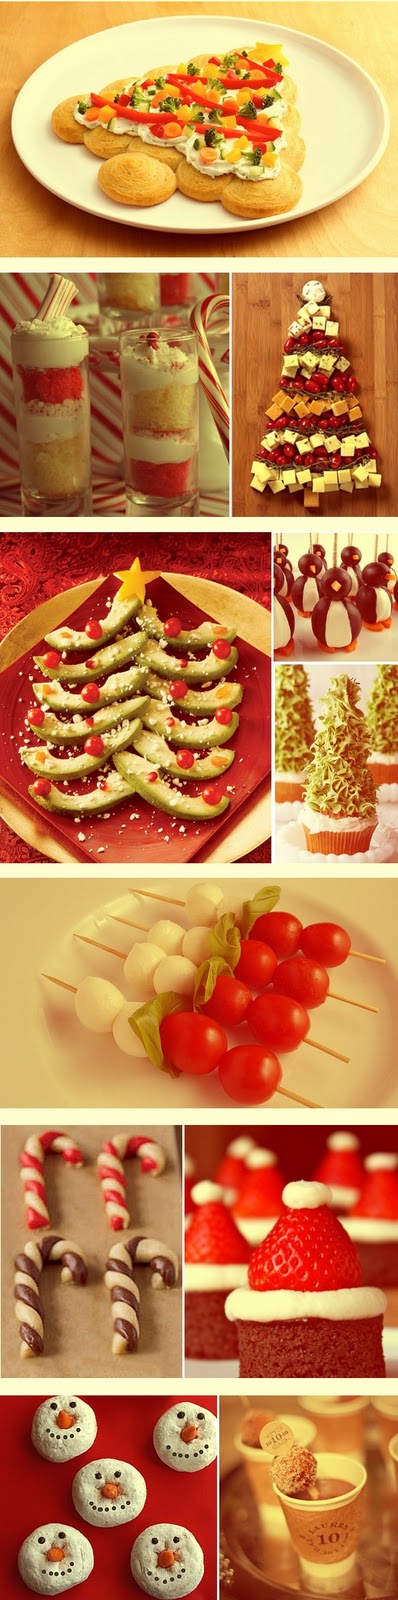 Take a look at our collection of Fa la la la Fabulous Finger foods for your 